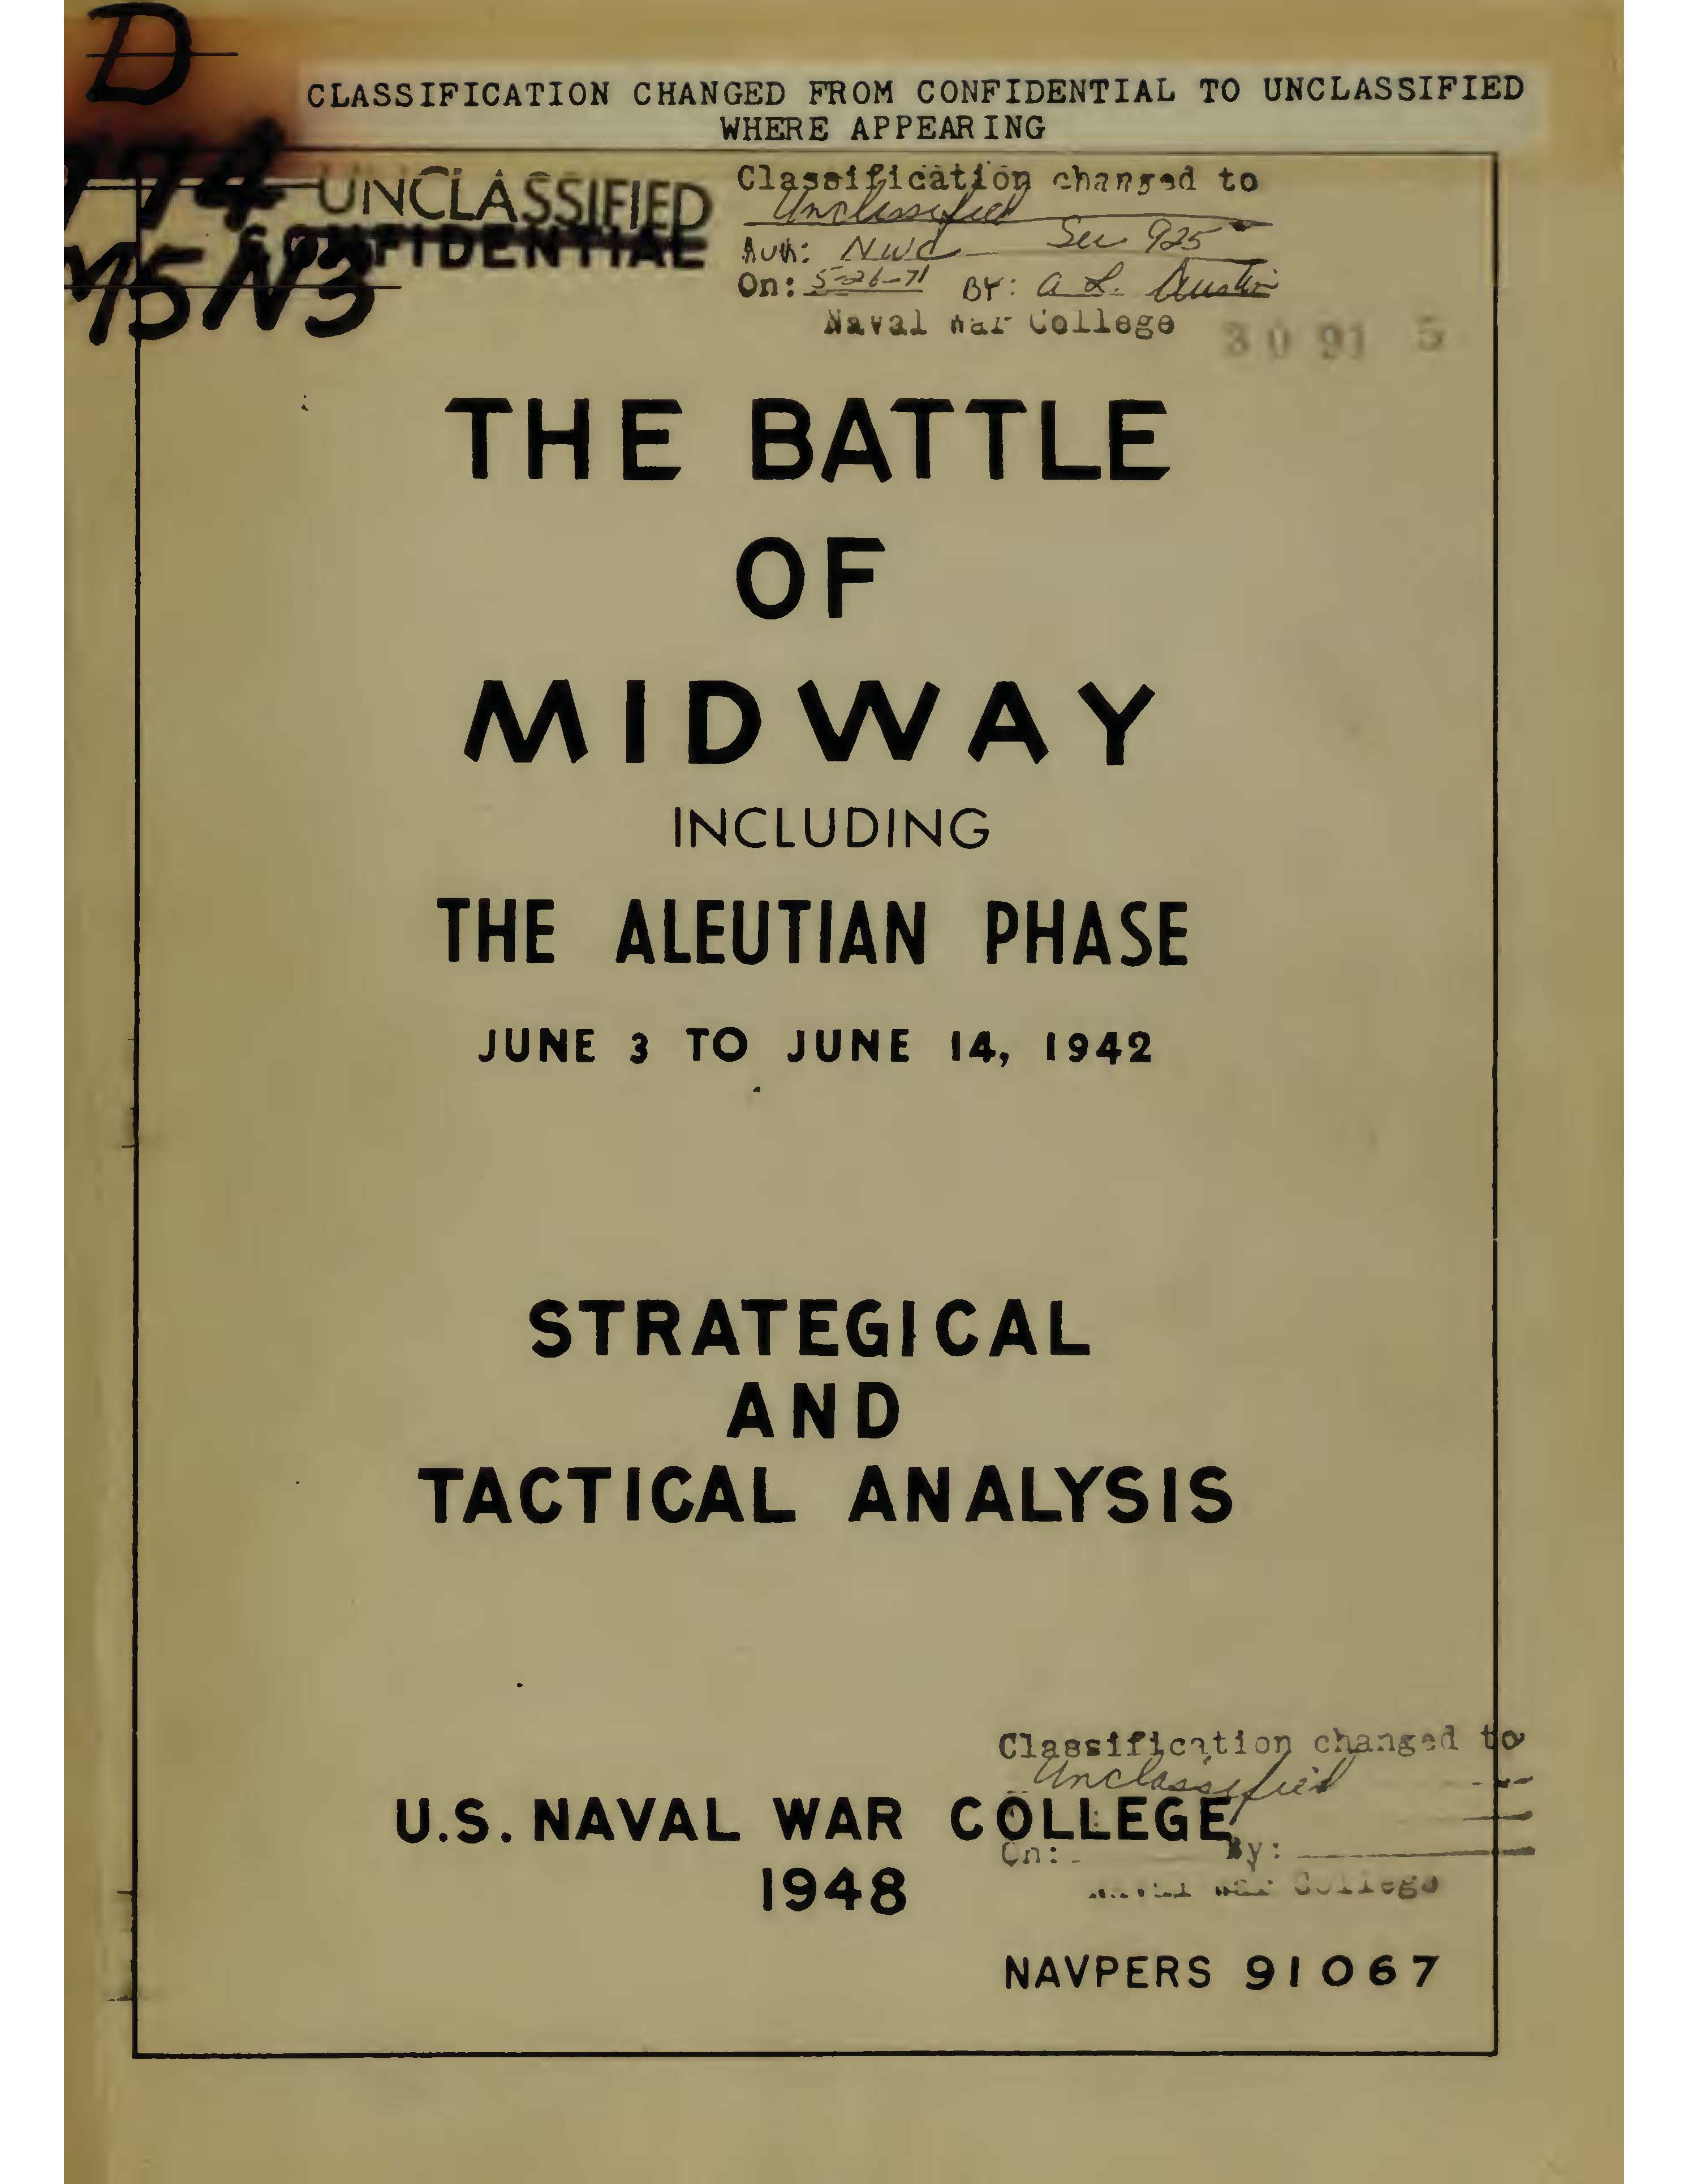 Battle of Midway including the Aleutian Phase, June 3 to June 14, 1942: Strategical and Tactical Analysis, 1948